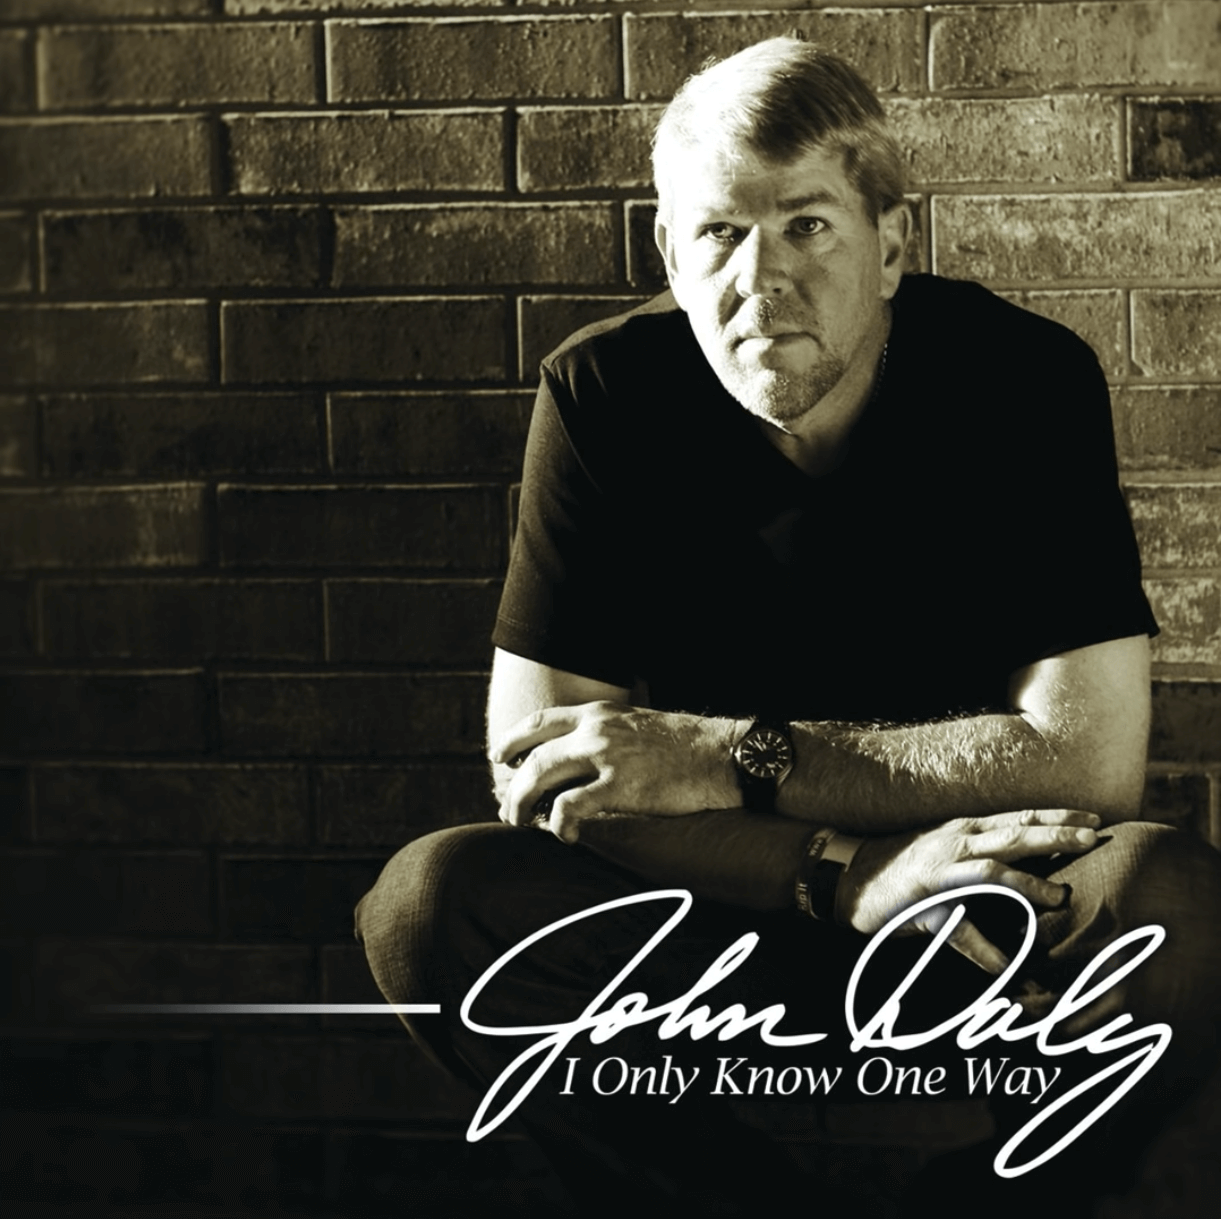 Grip it and Rip it_John Daly 20220422 - John Daly I only Know One Way 21